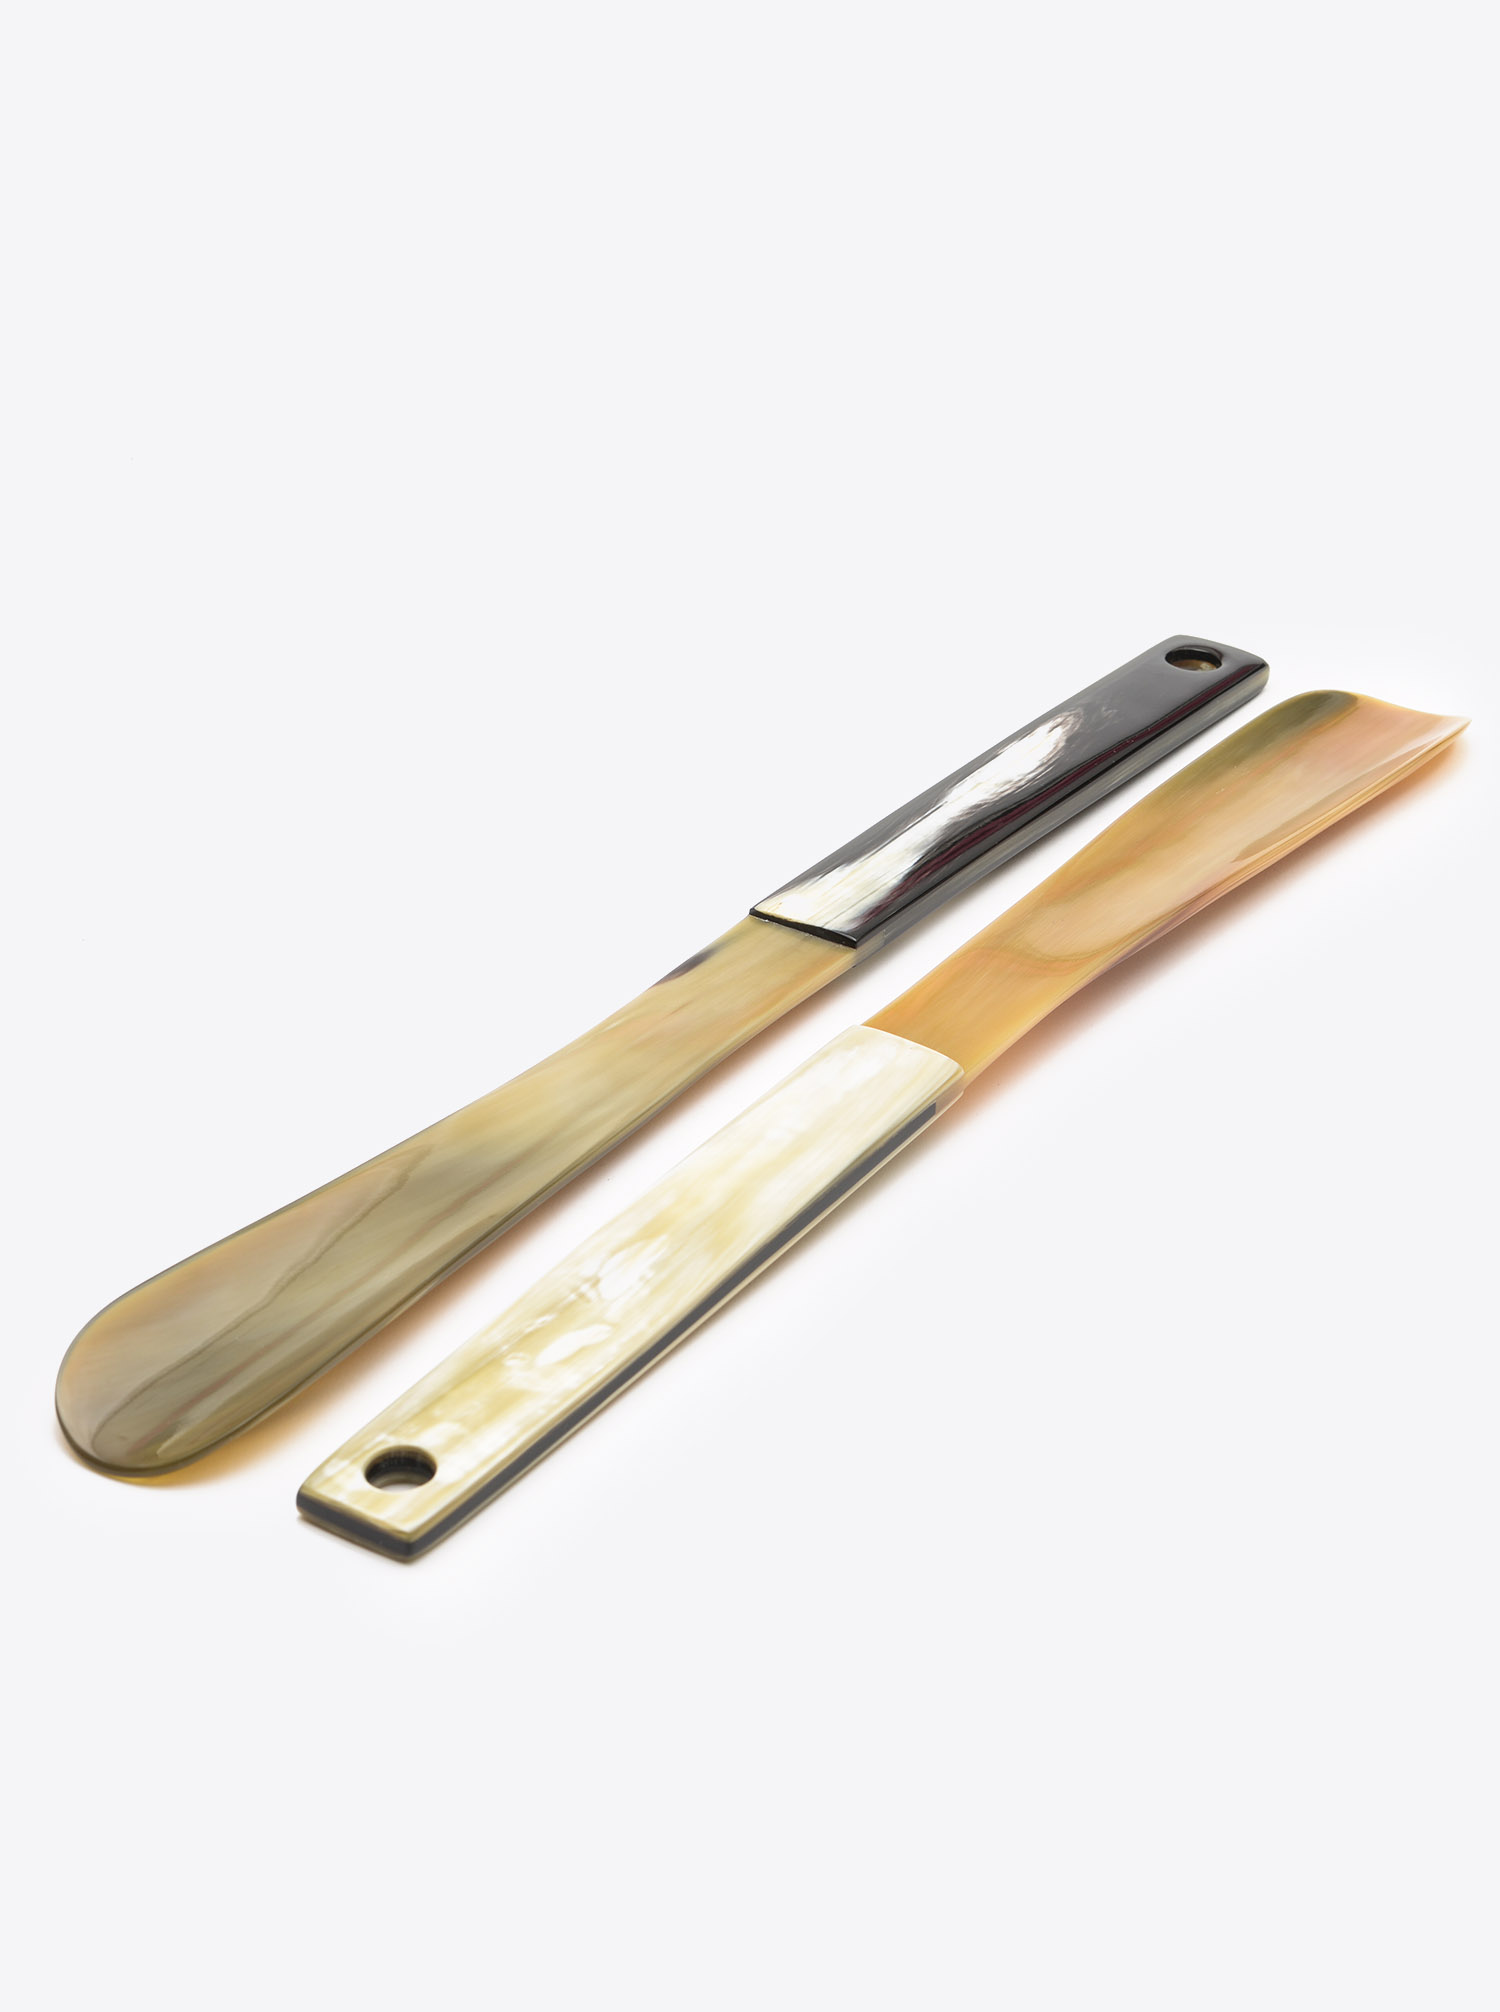 Shoehorn made of Horn light with dark handle